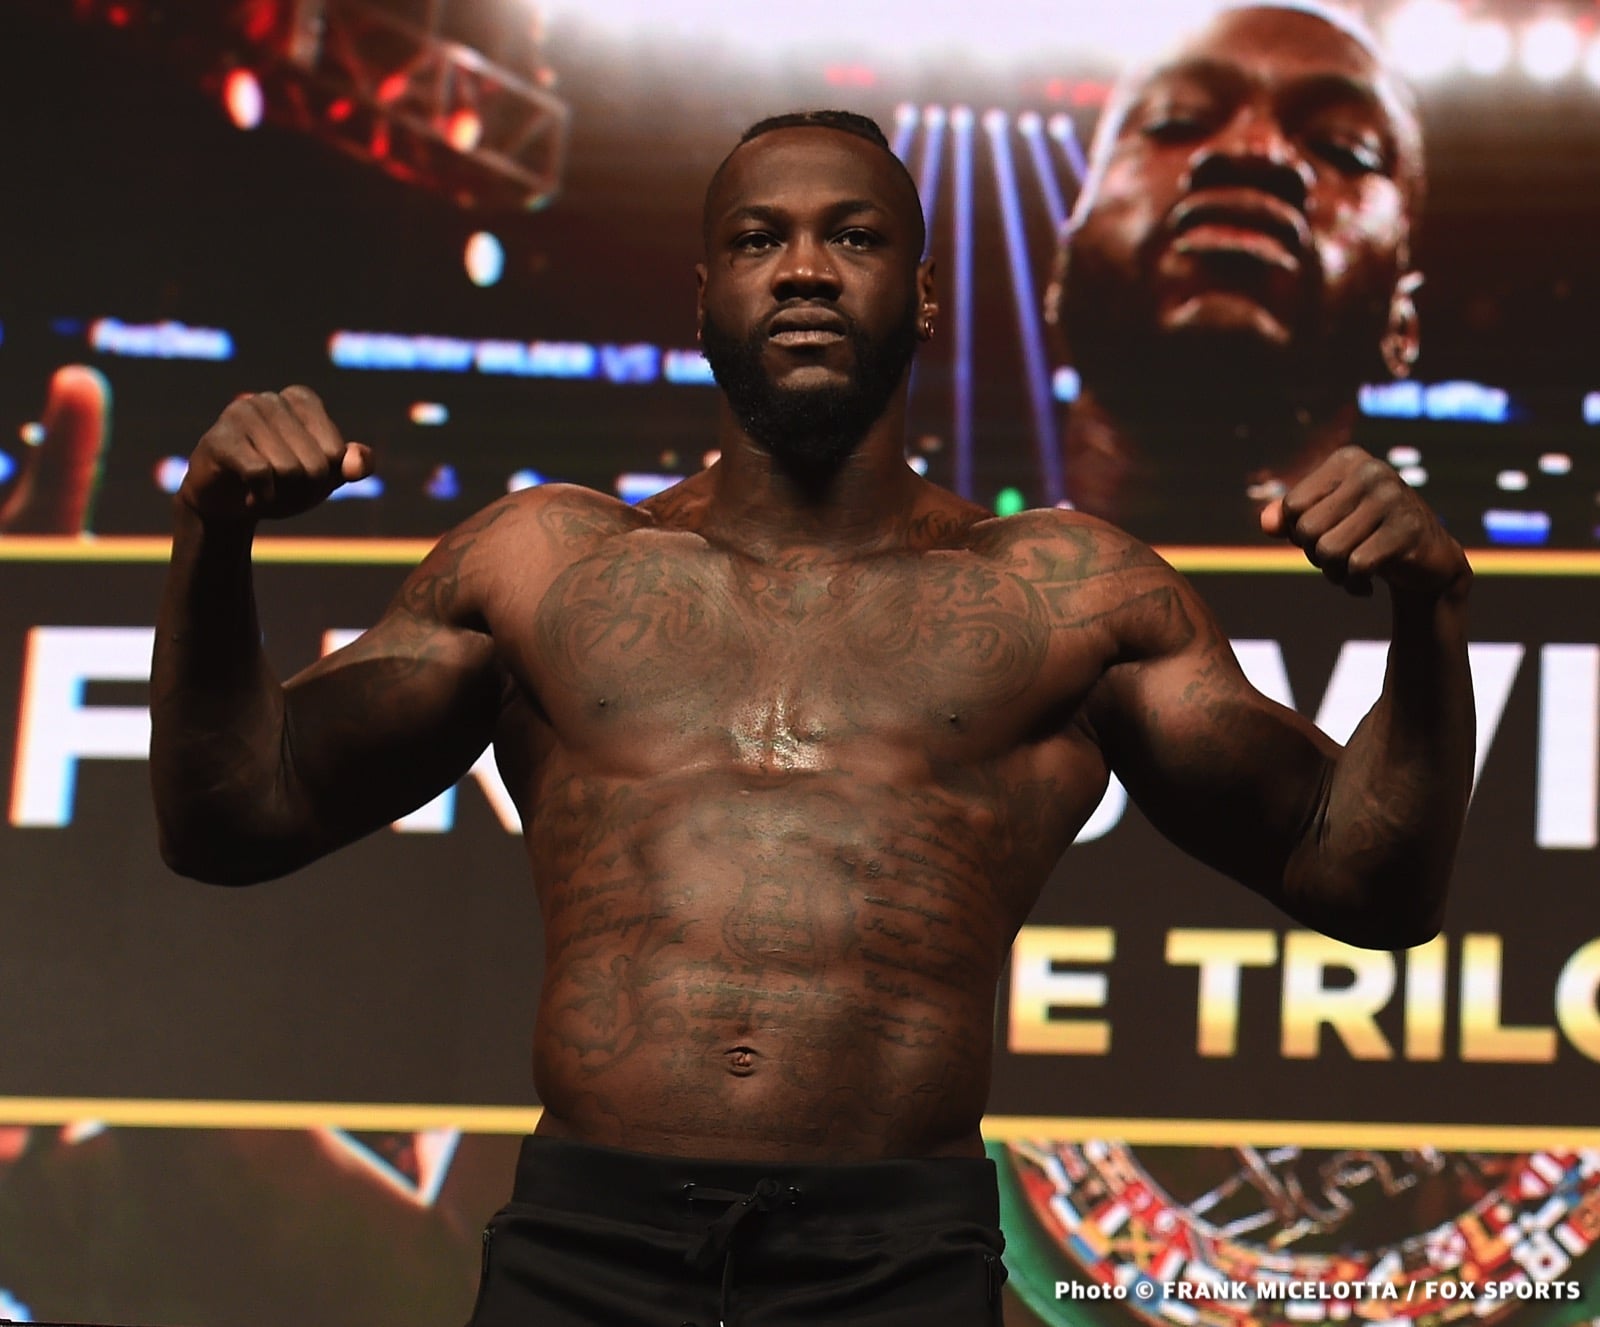 Image: Antonio Tarver says Deontay Wilder's bulk could slow him down for Tyson Fury trilogy